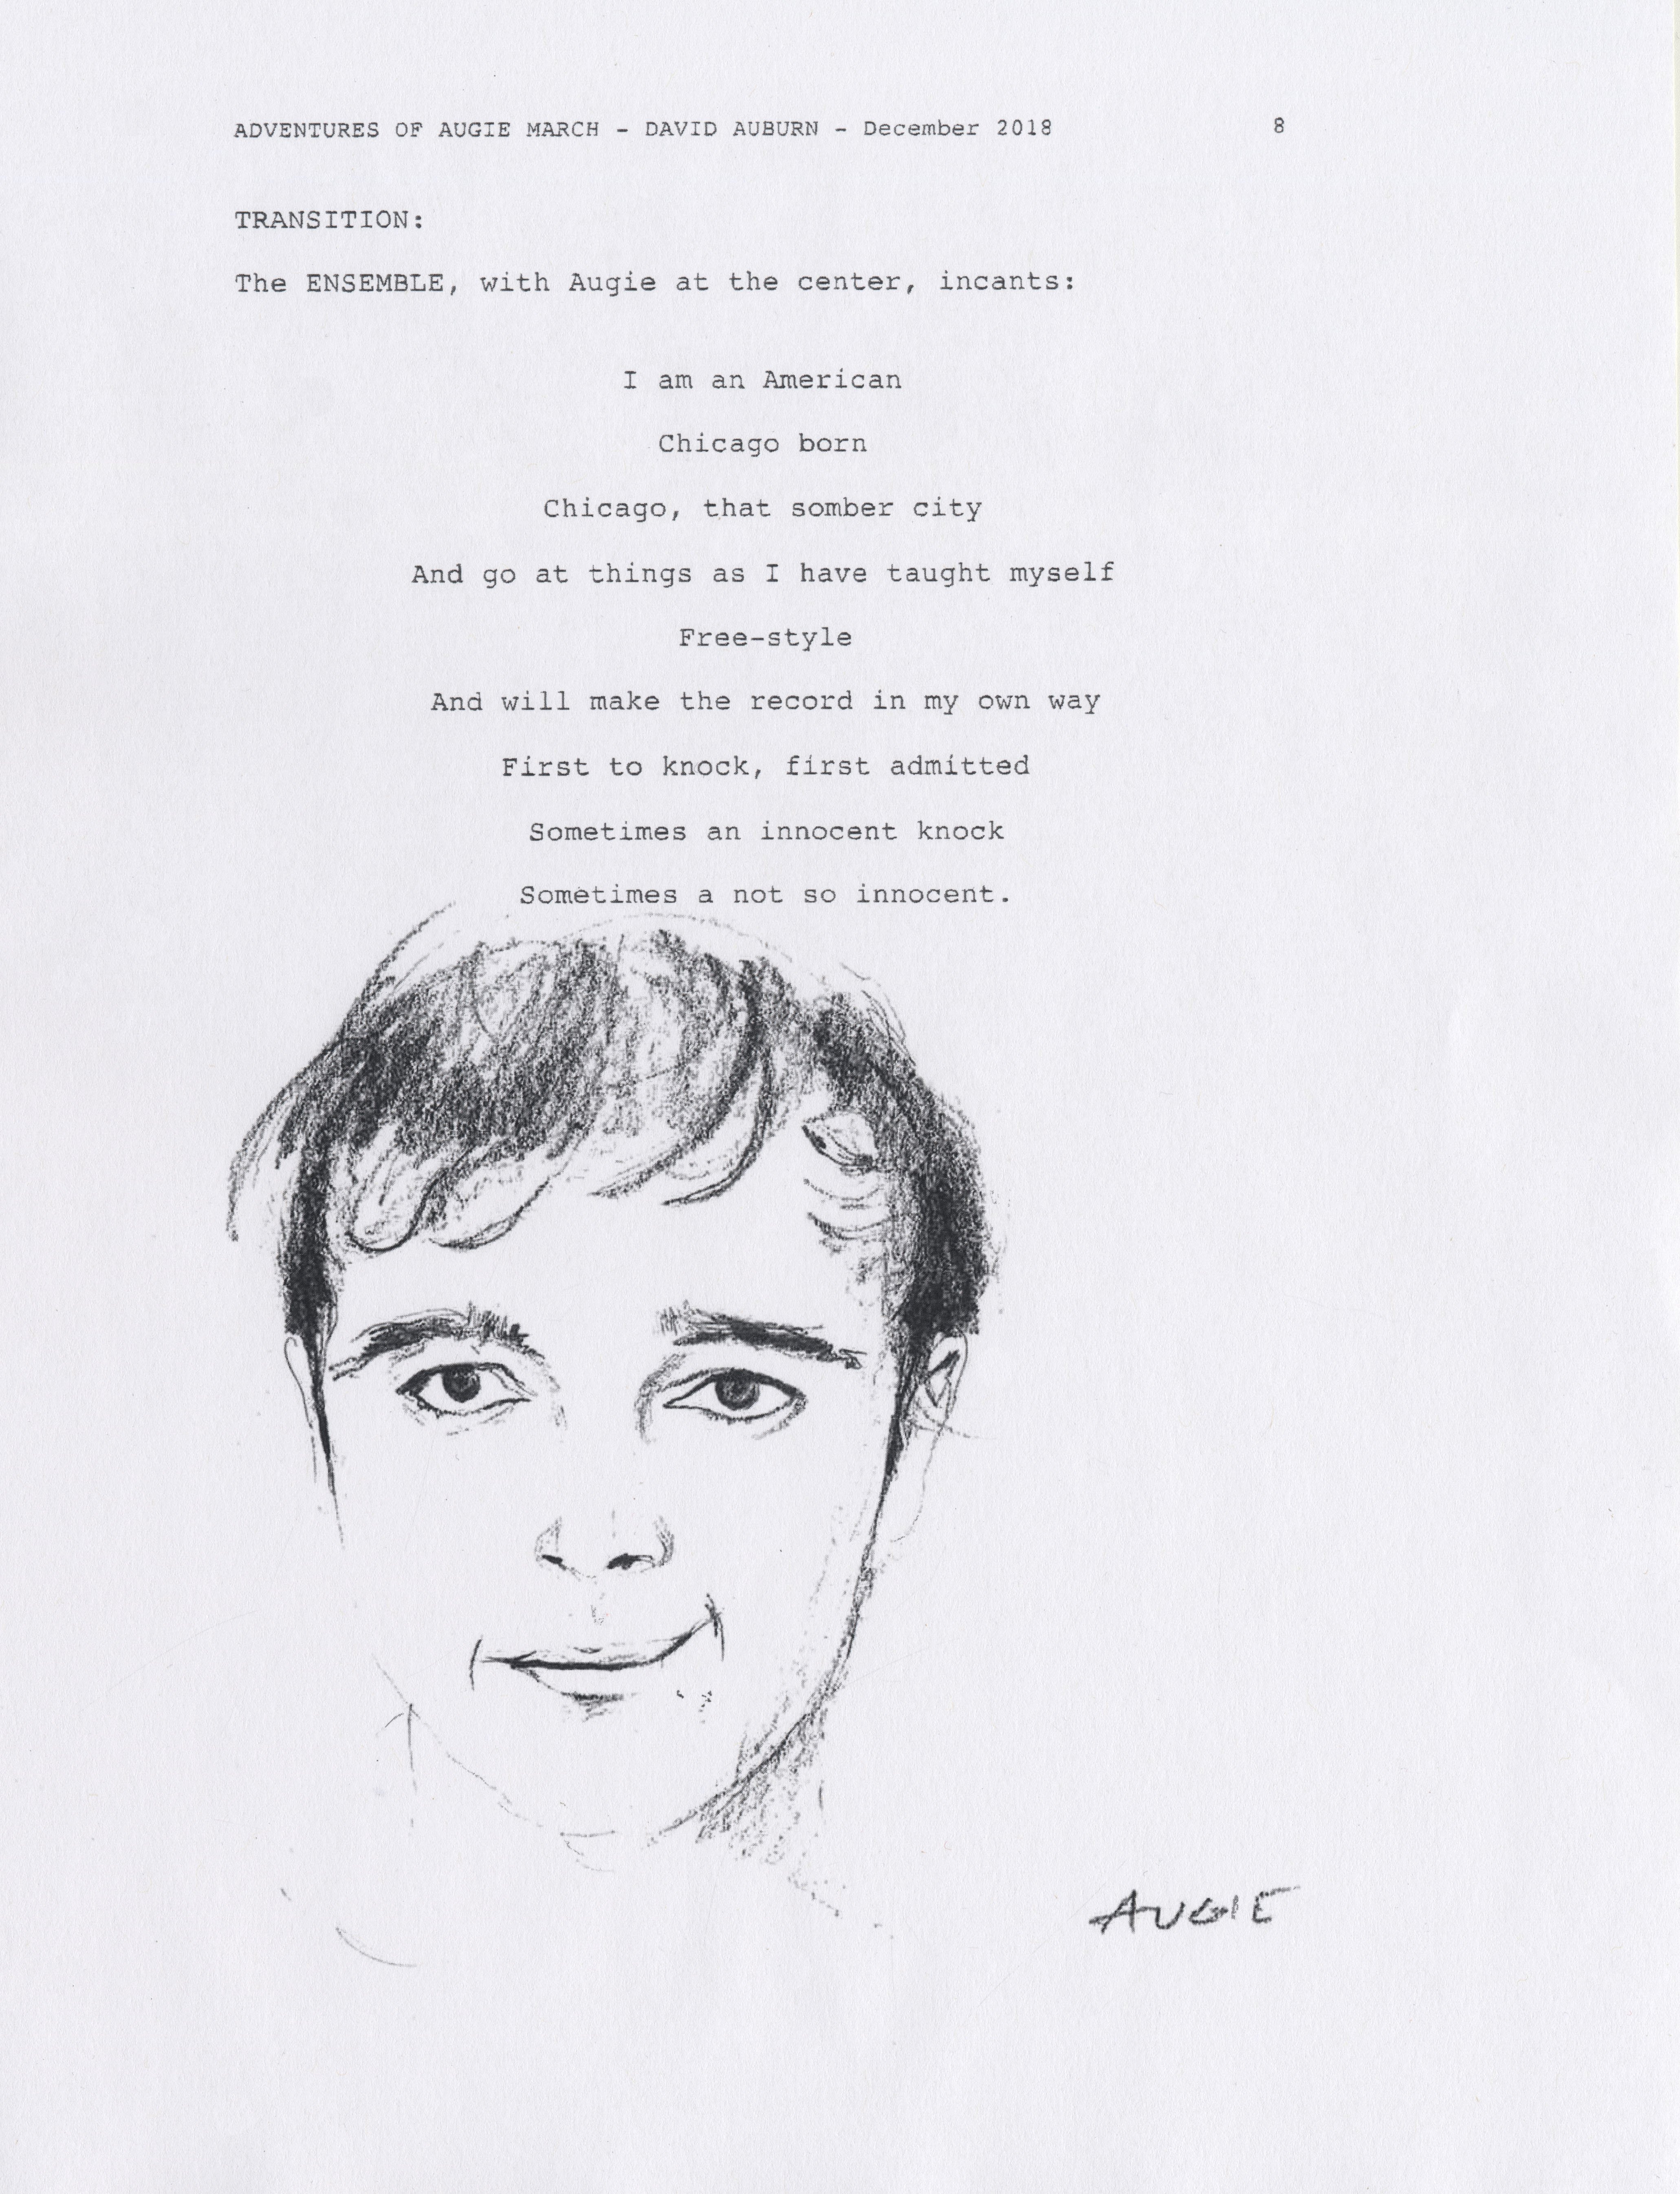 A sketch of a  head on a page from the script of "The Adventures of Augie March"